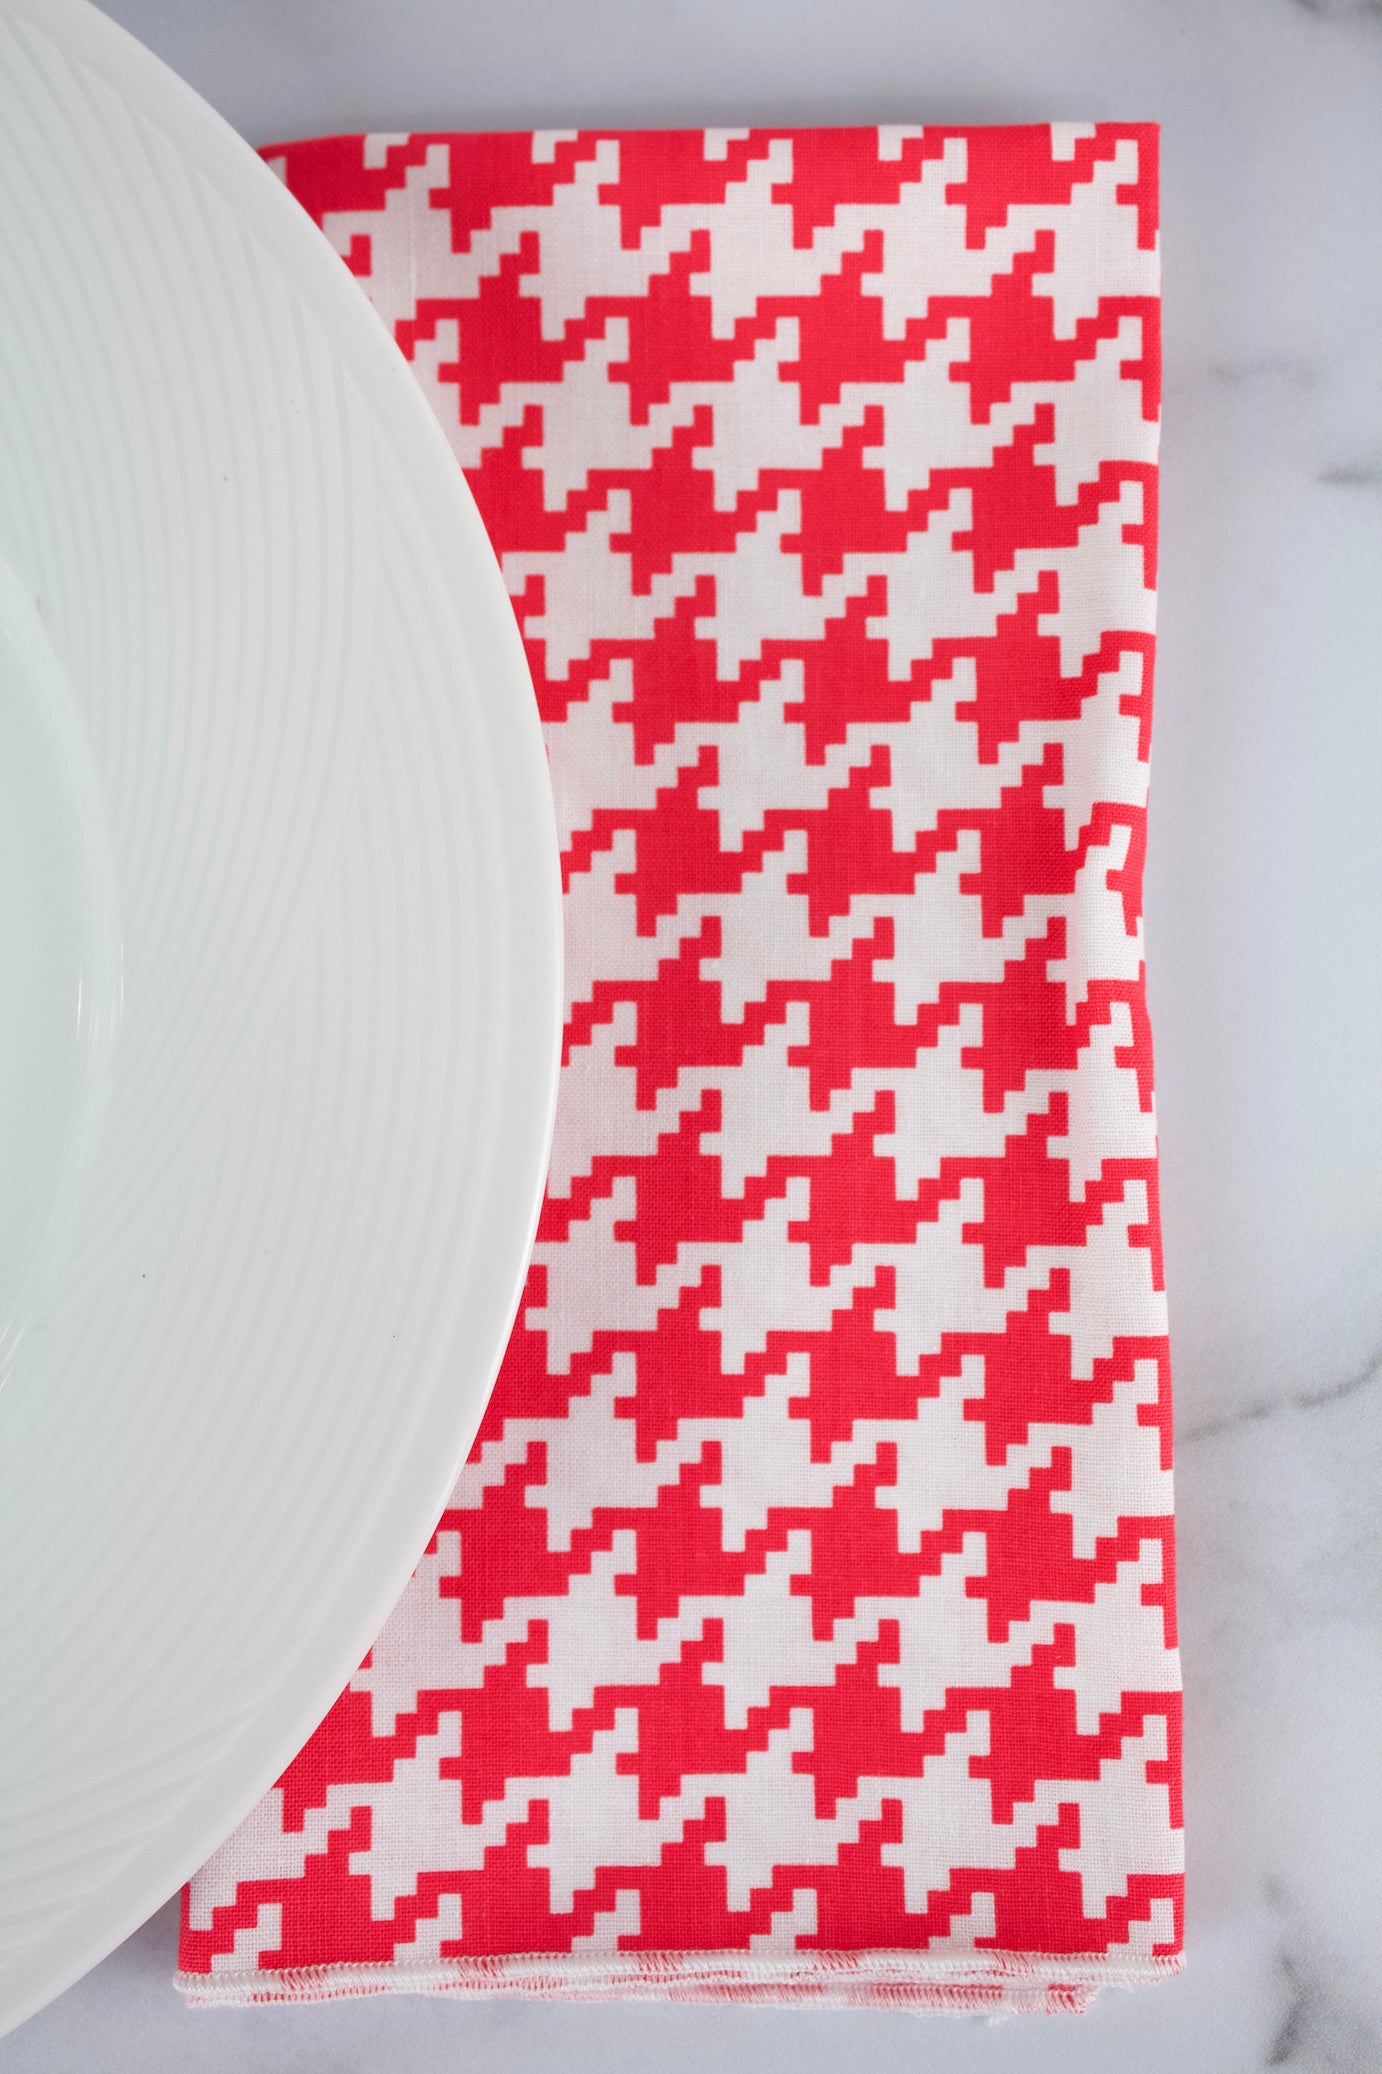 Lipstick Houndstooth Napkins - (Set of 4)-The Blue Peony-Category_Napkins,Category_Table Linens,Color_Pink,Color_White,Department_Kitchen,Material_Cotton,Pattern_Graphic